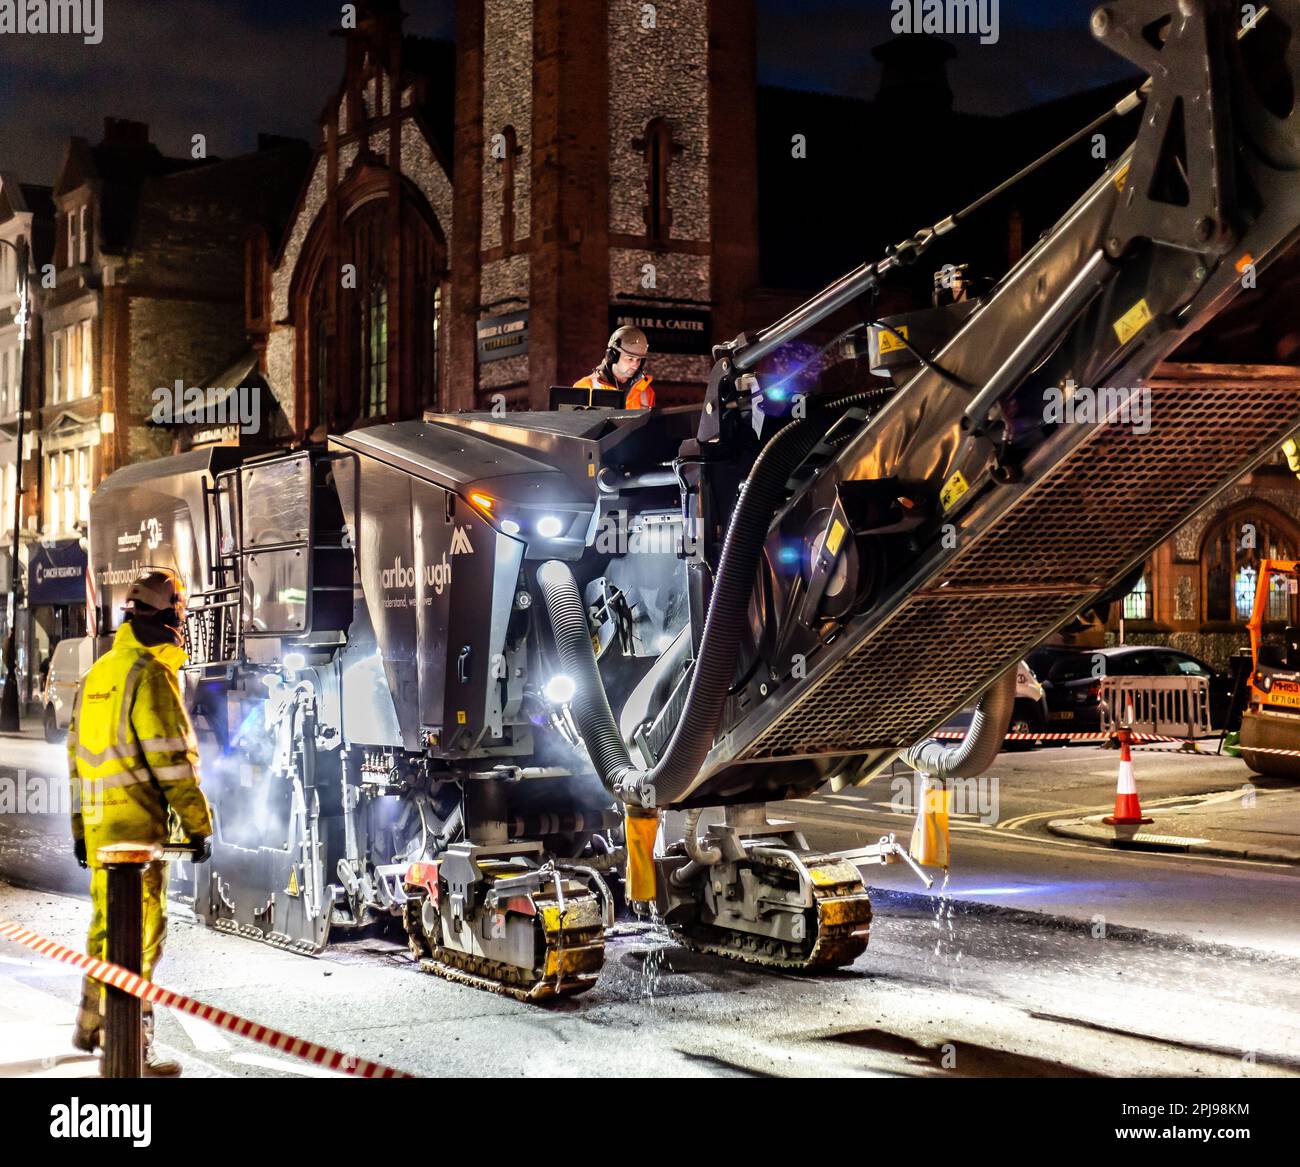 A massiveTarmac cutting machine is seen here in an urban city high street operating at night to avoid disruption during the day. Stock Photo